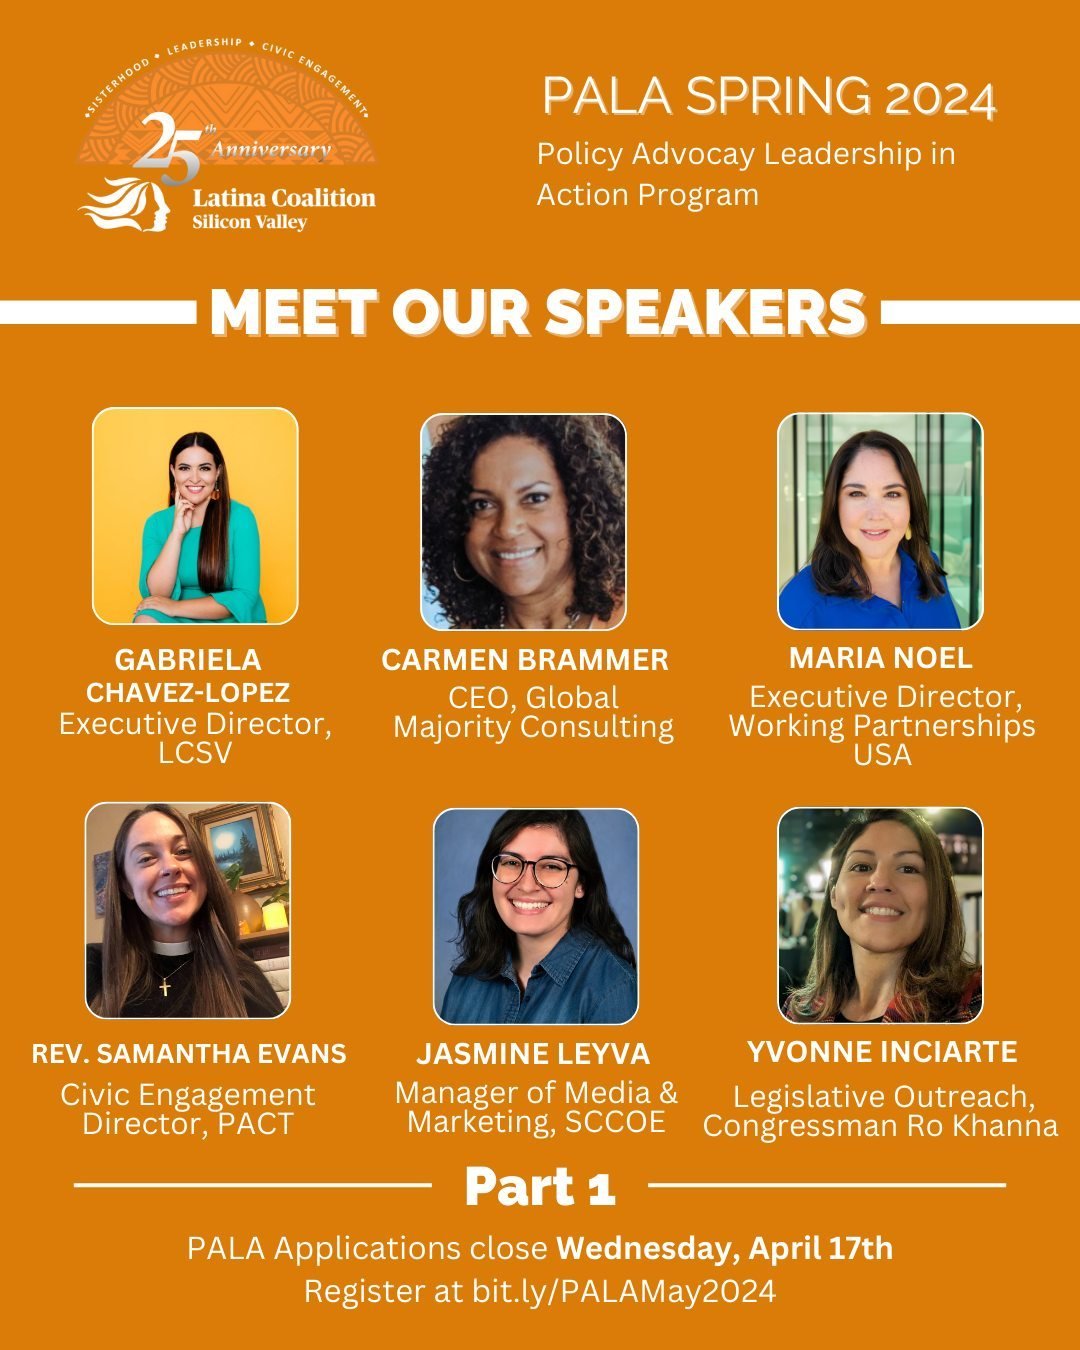 🎉 Introducing our PALA Spring 2024 speaker lineup. Here's a sneak peek at some of our amazing speakers!

🚨 Deadline to apply is this Wednesday, April 17th. 

Register using our link in bio